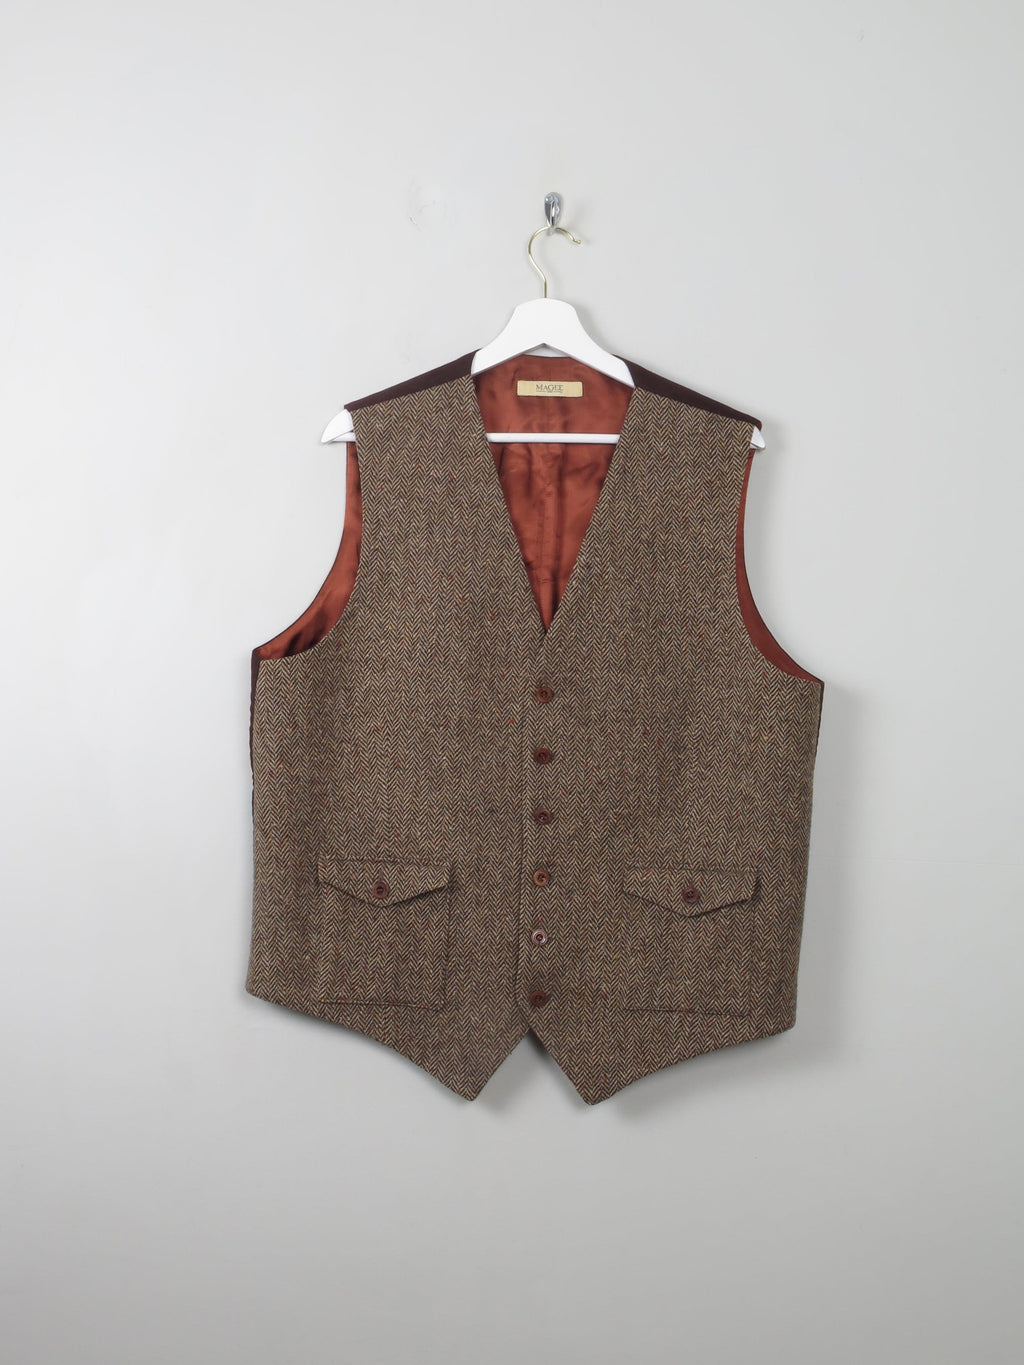 Mens Vintage Style Donegal Tweed Waistcoat XL 44/46 - The Harlequin